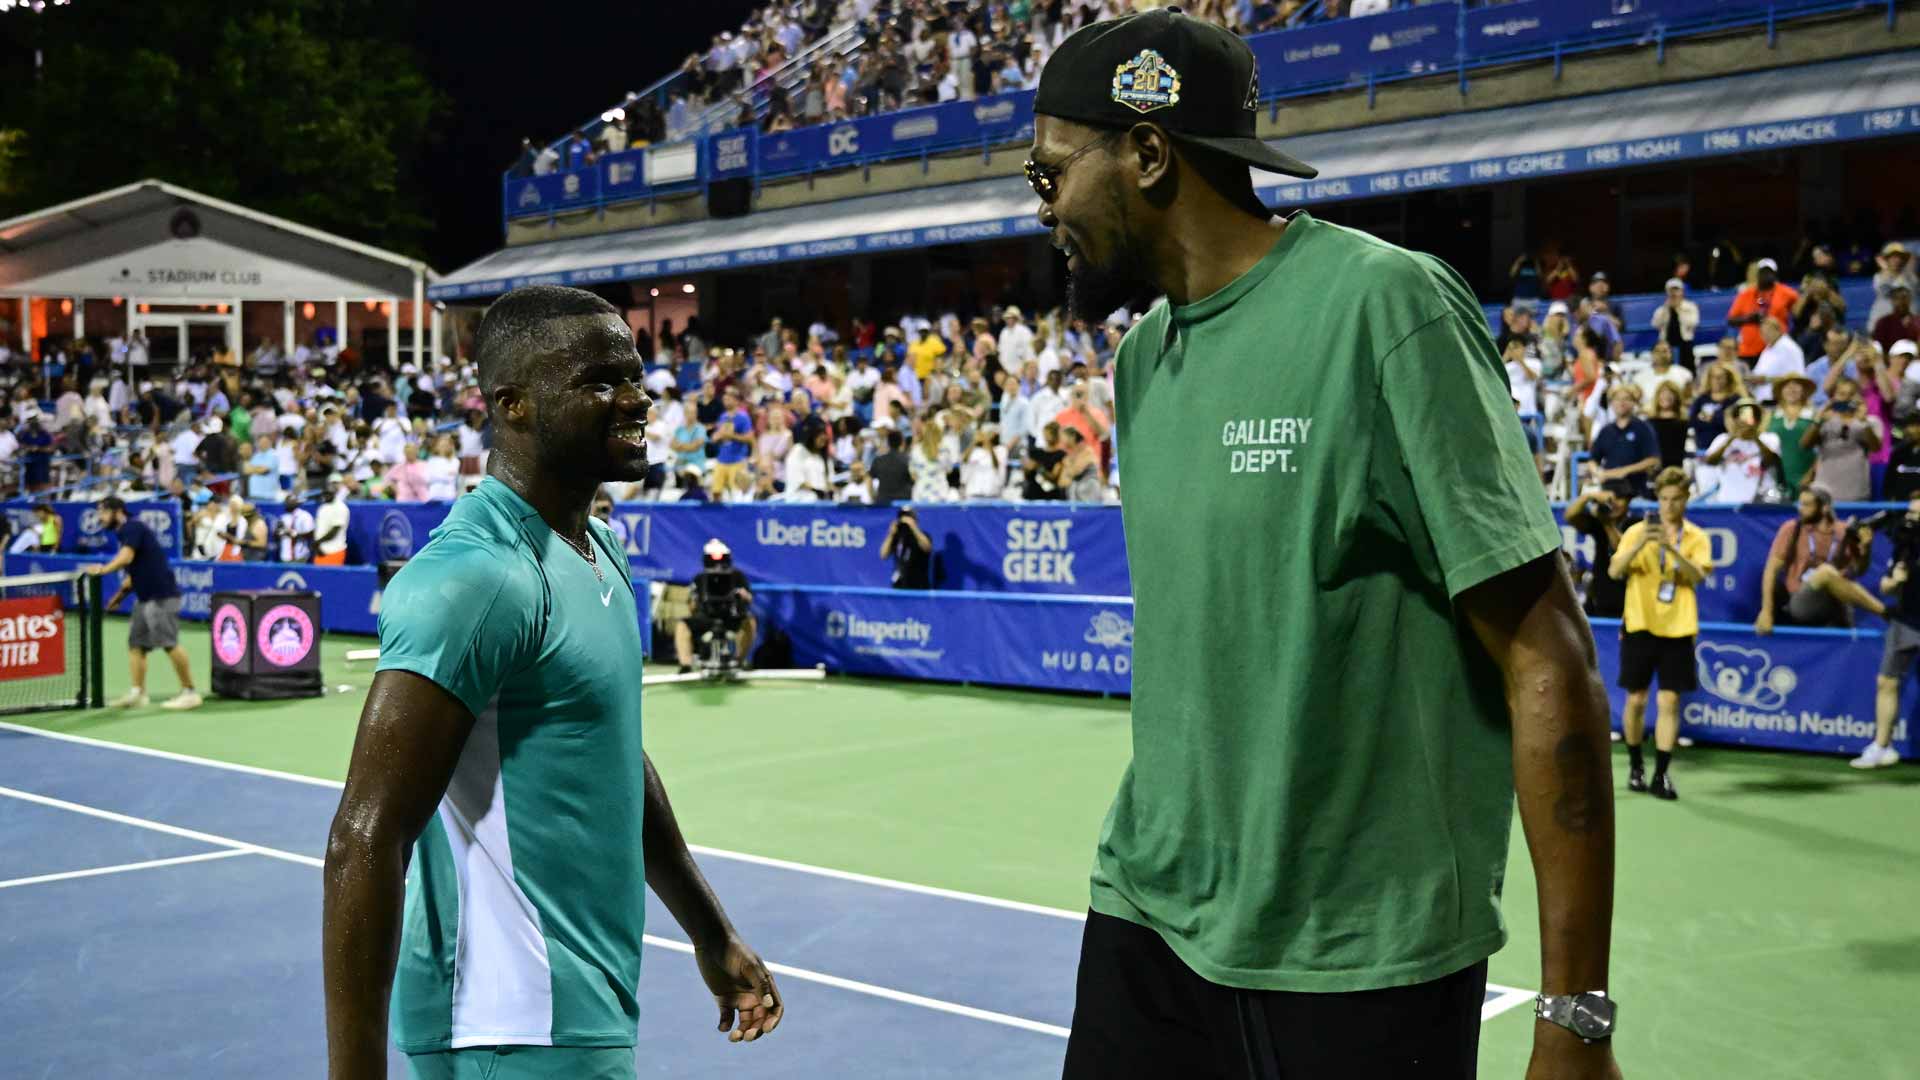 Frances Tiafoe and Kevin Durant greet each other after Tiafoe's Tuesday evening win in Washington.